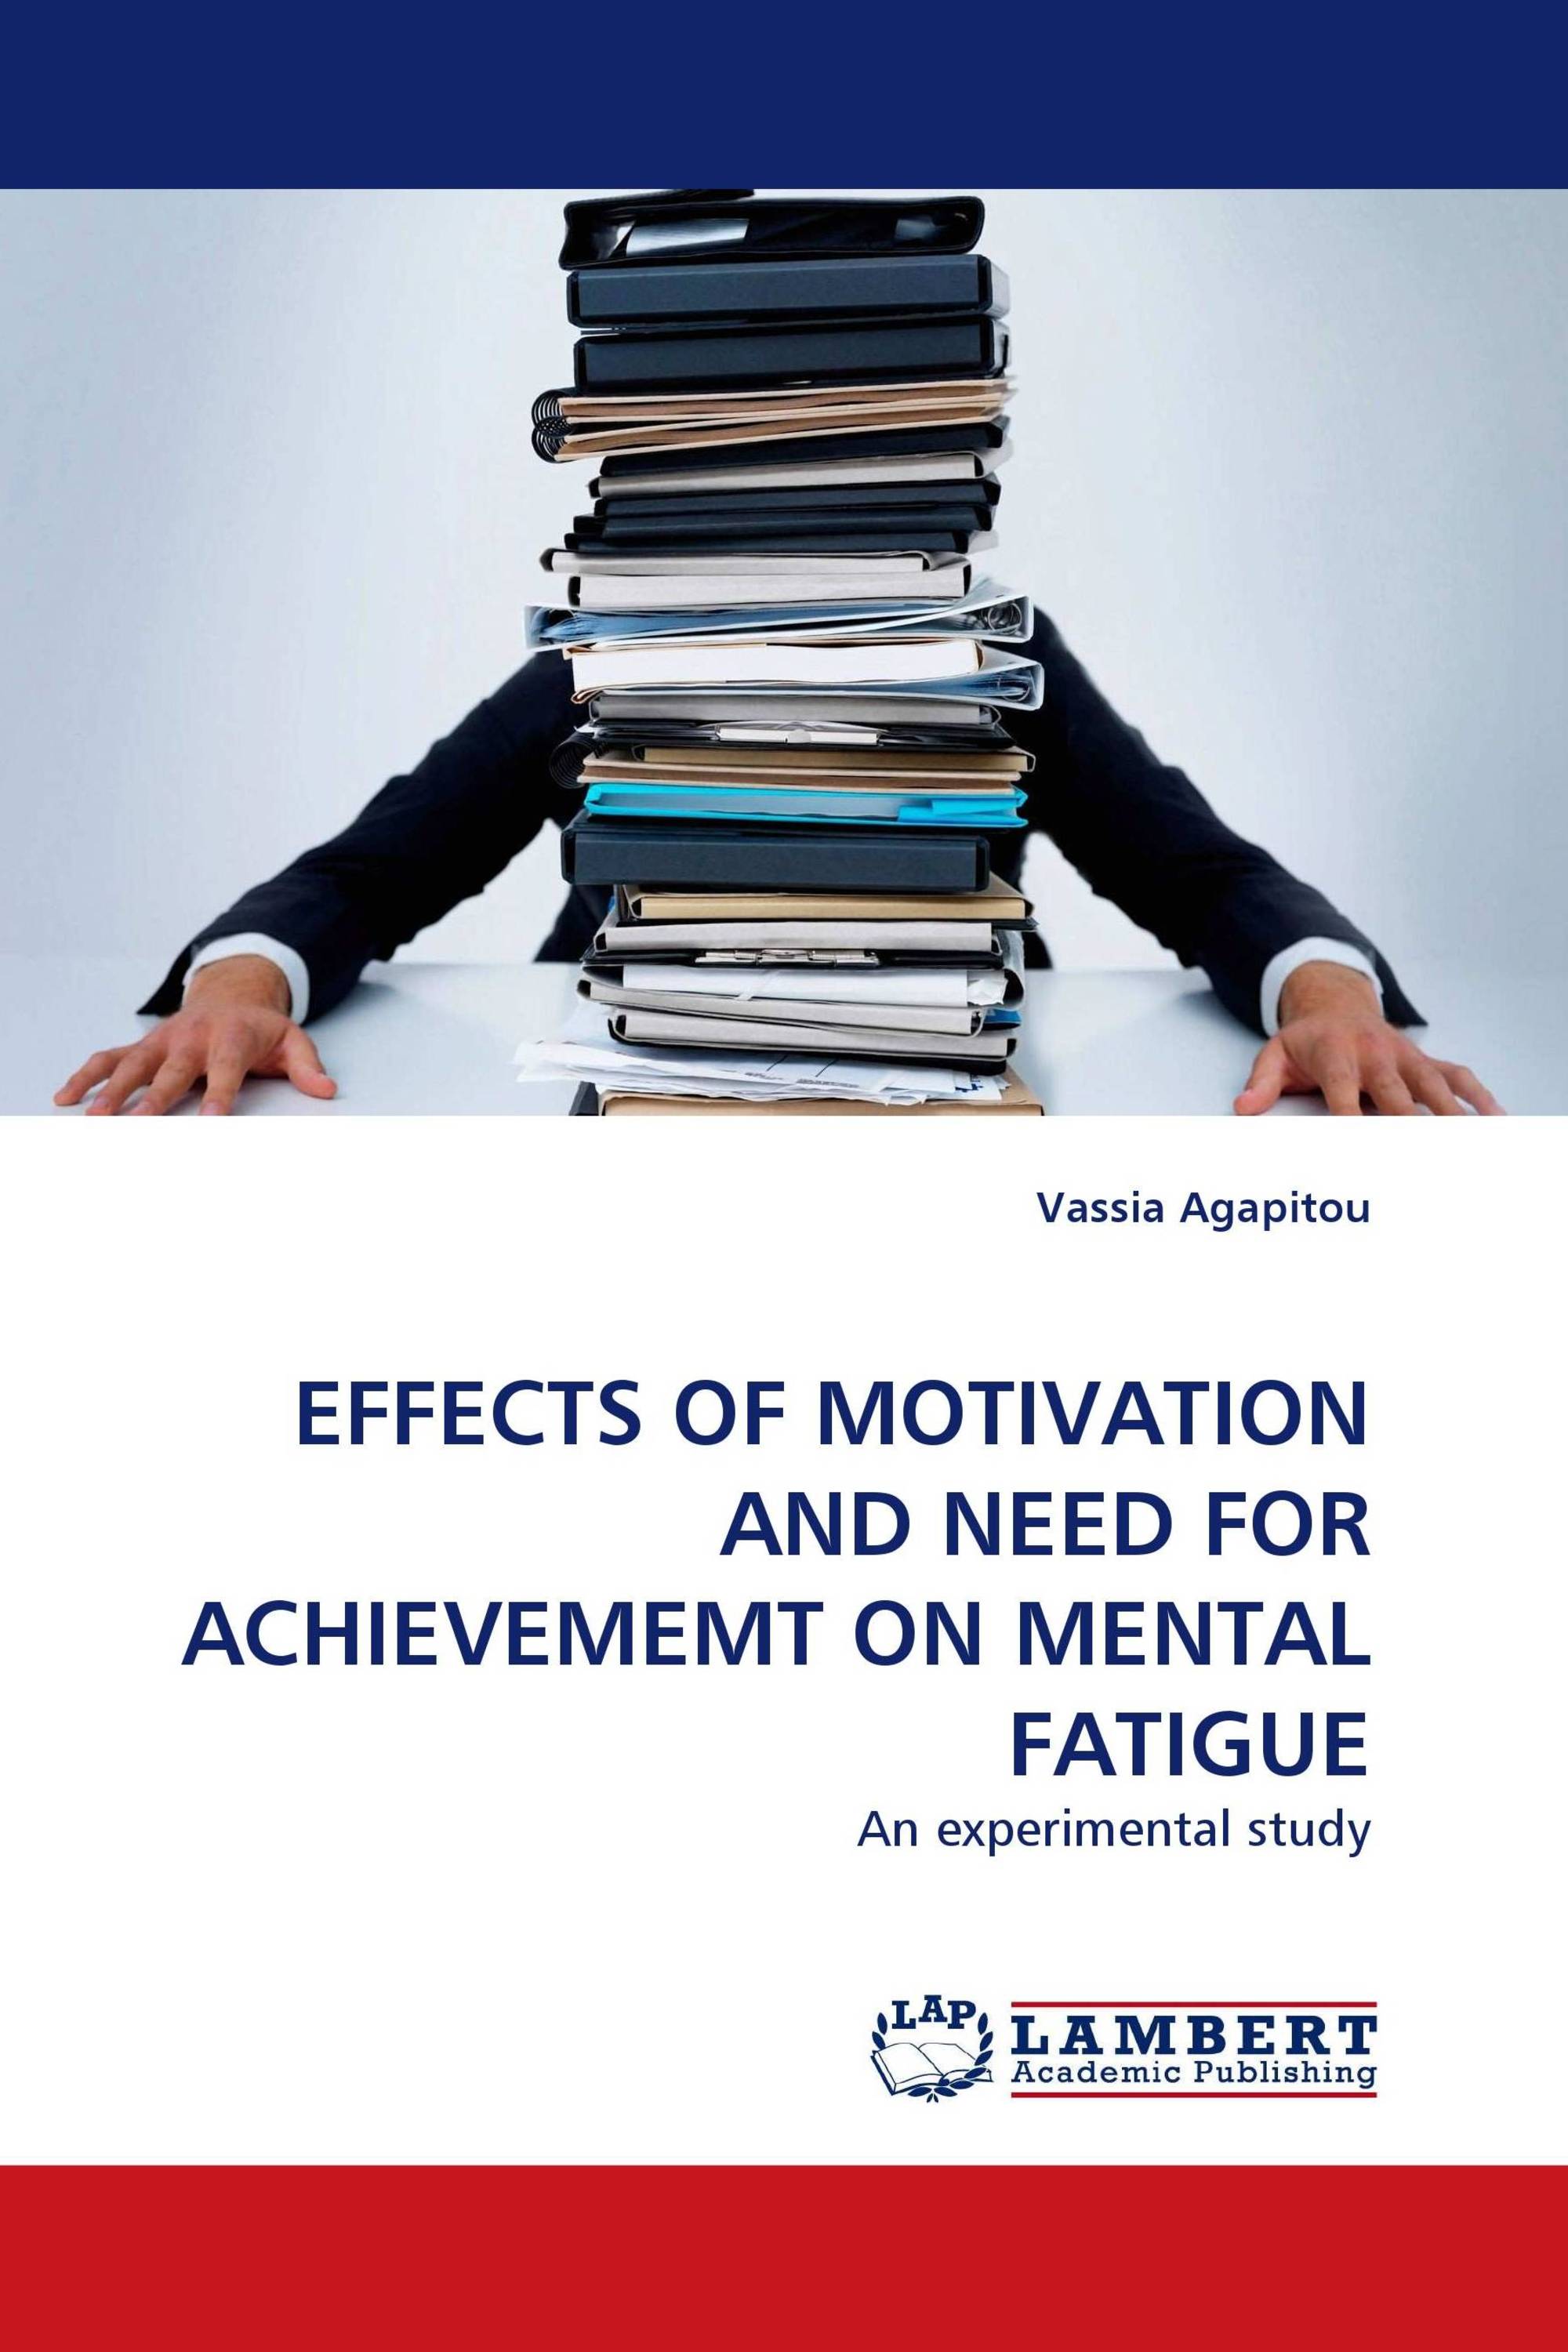 EFFECTS OF MOTIVATION AND NEED FOR ACHIEVEMEMT ON MENTAL FATIGUE